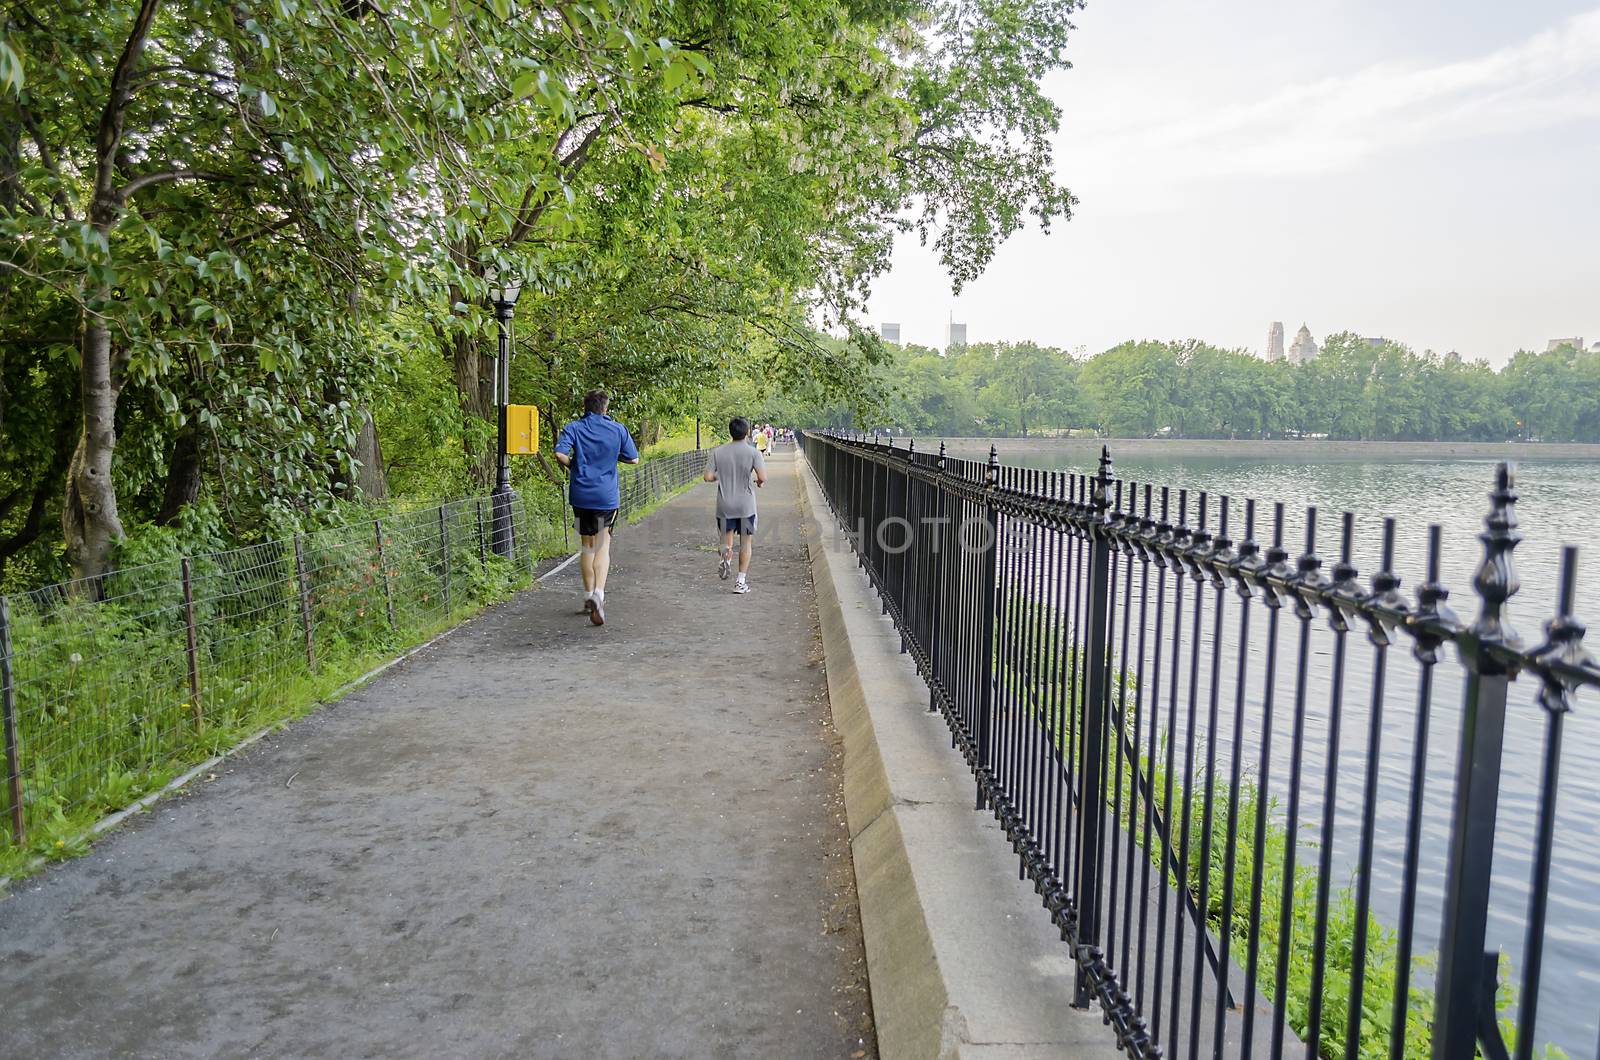 Typical path for Jogging in Central Park, New York City, USA